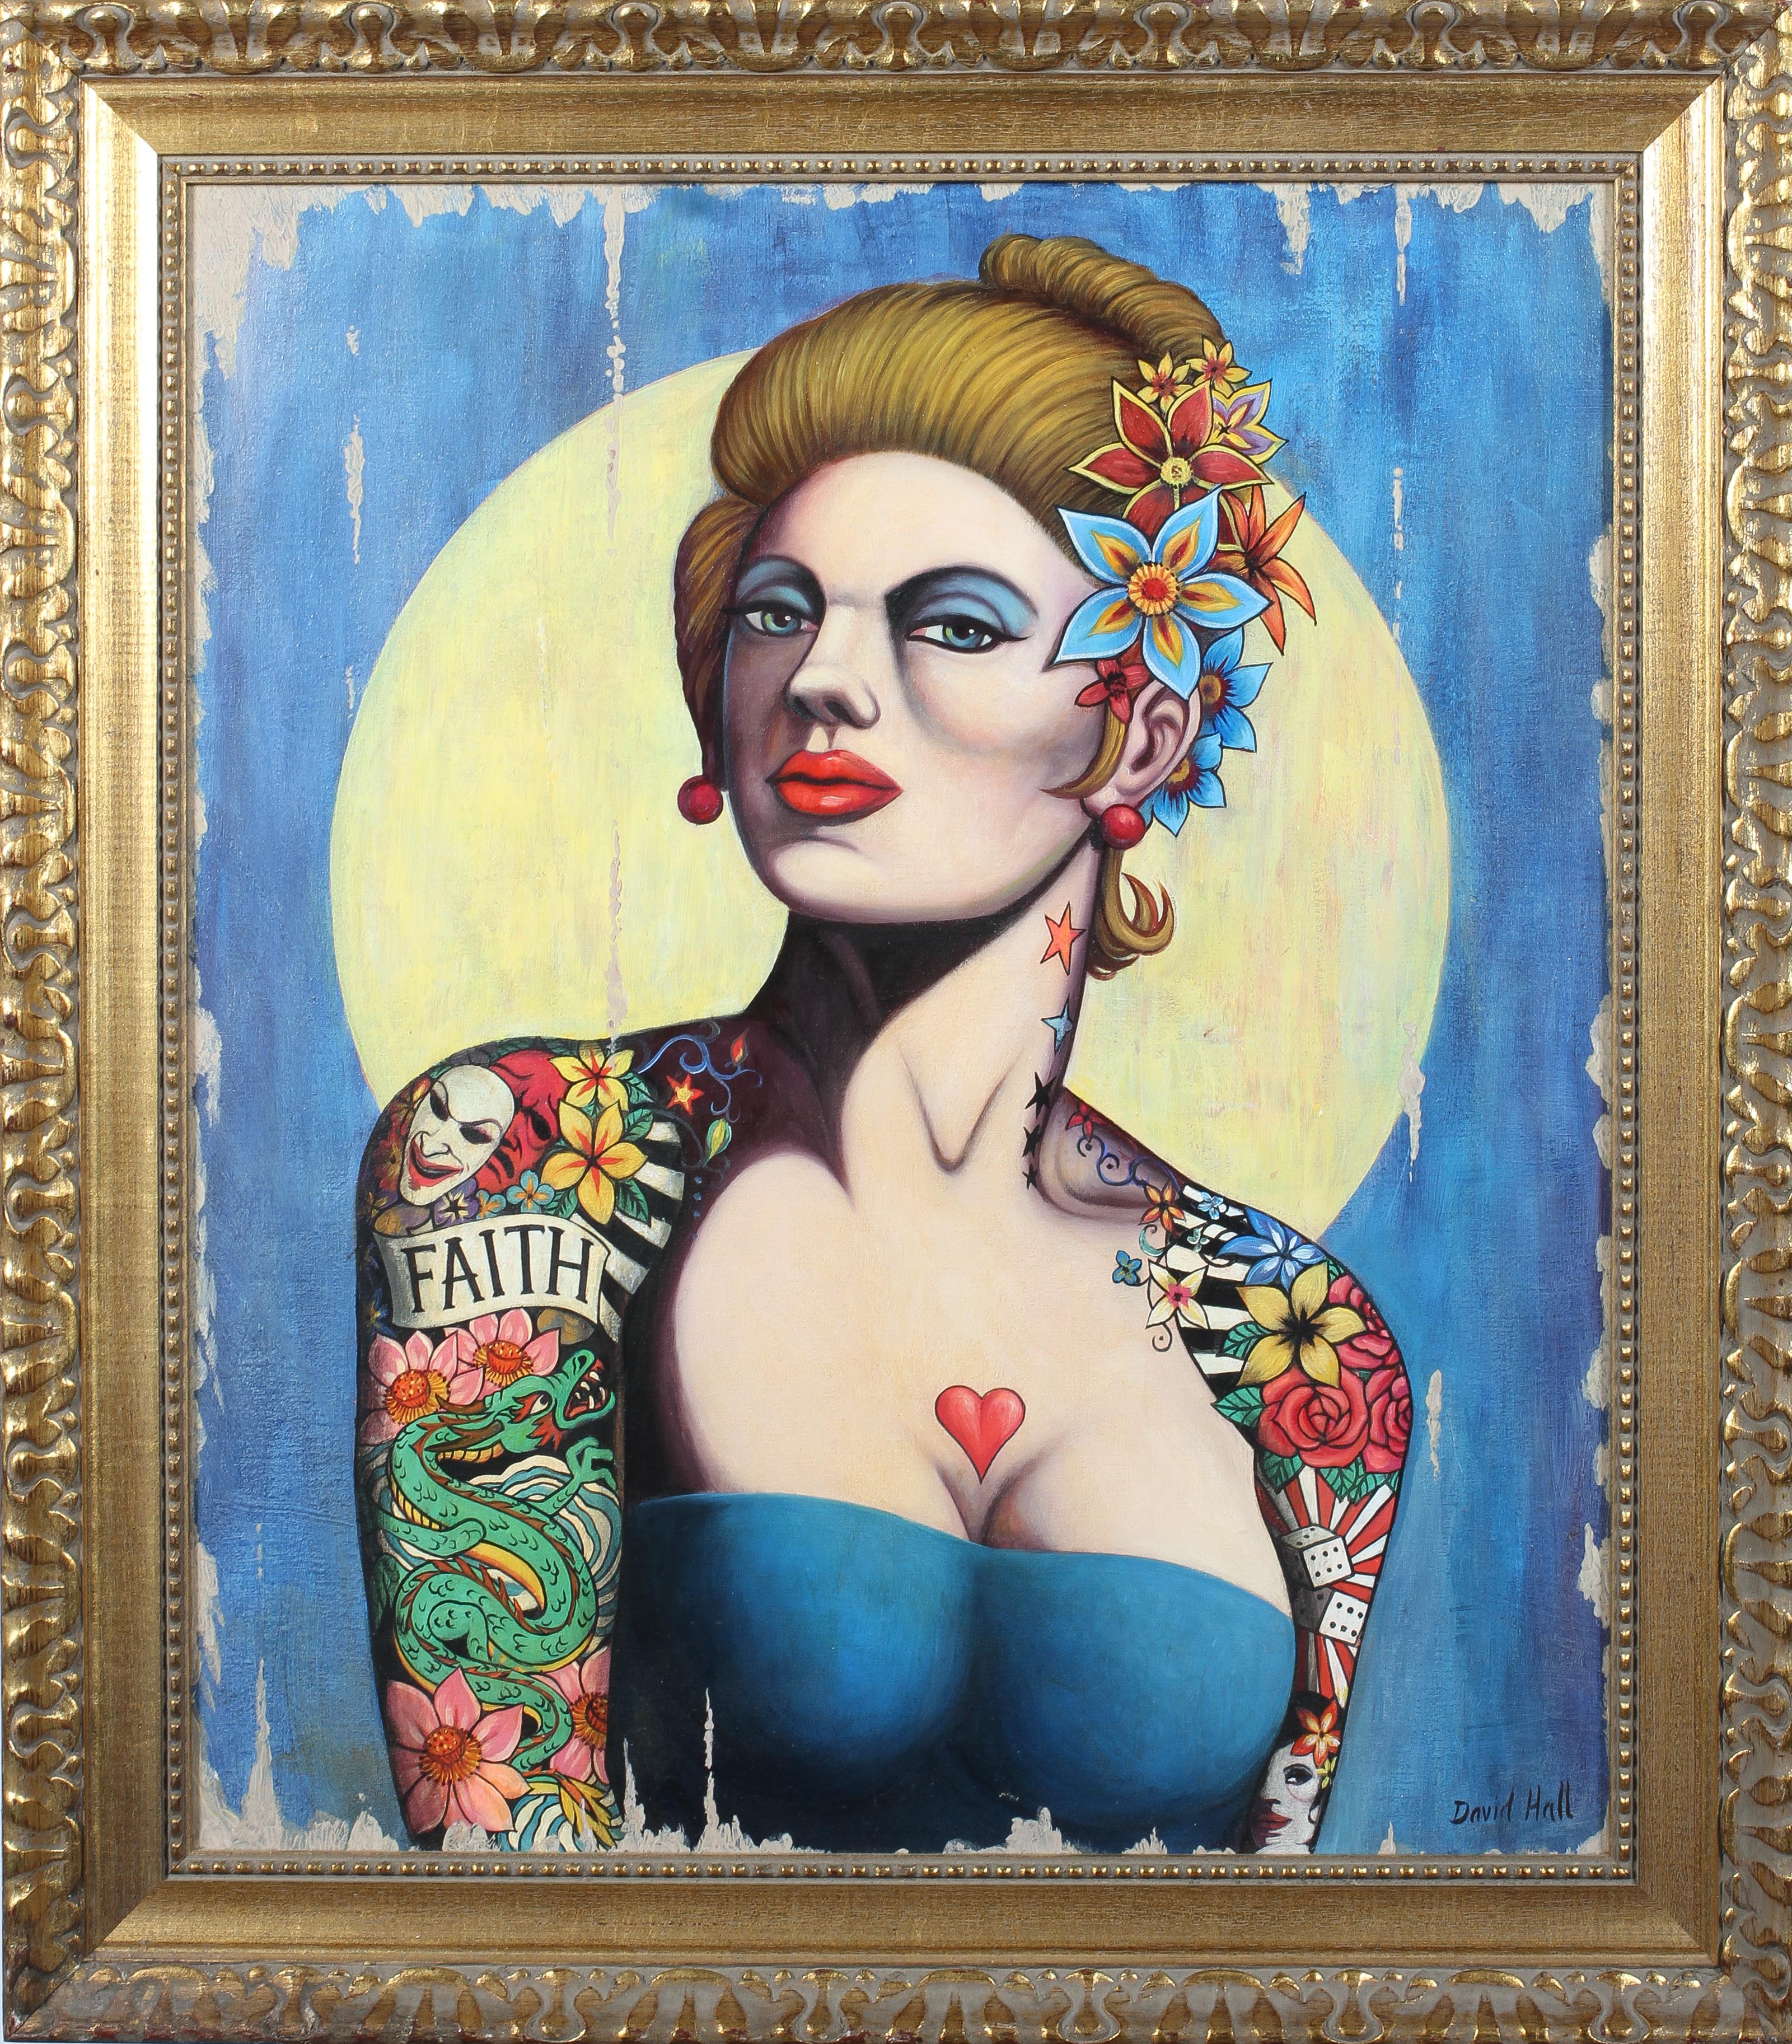 David Hall, 'Faith', A tattooed lady, oil on board, signed lower right, - Image 2 of 2